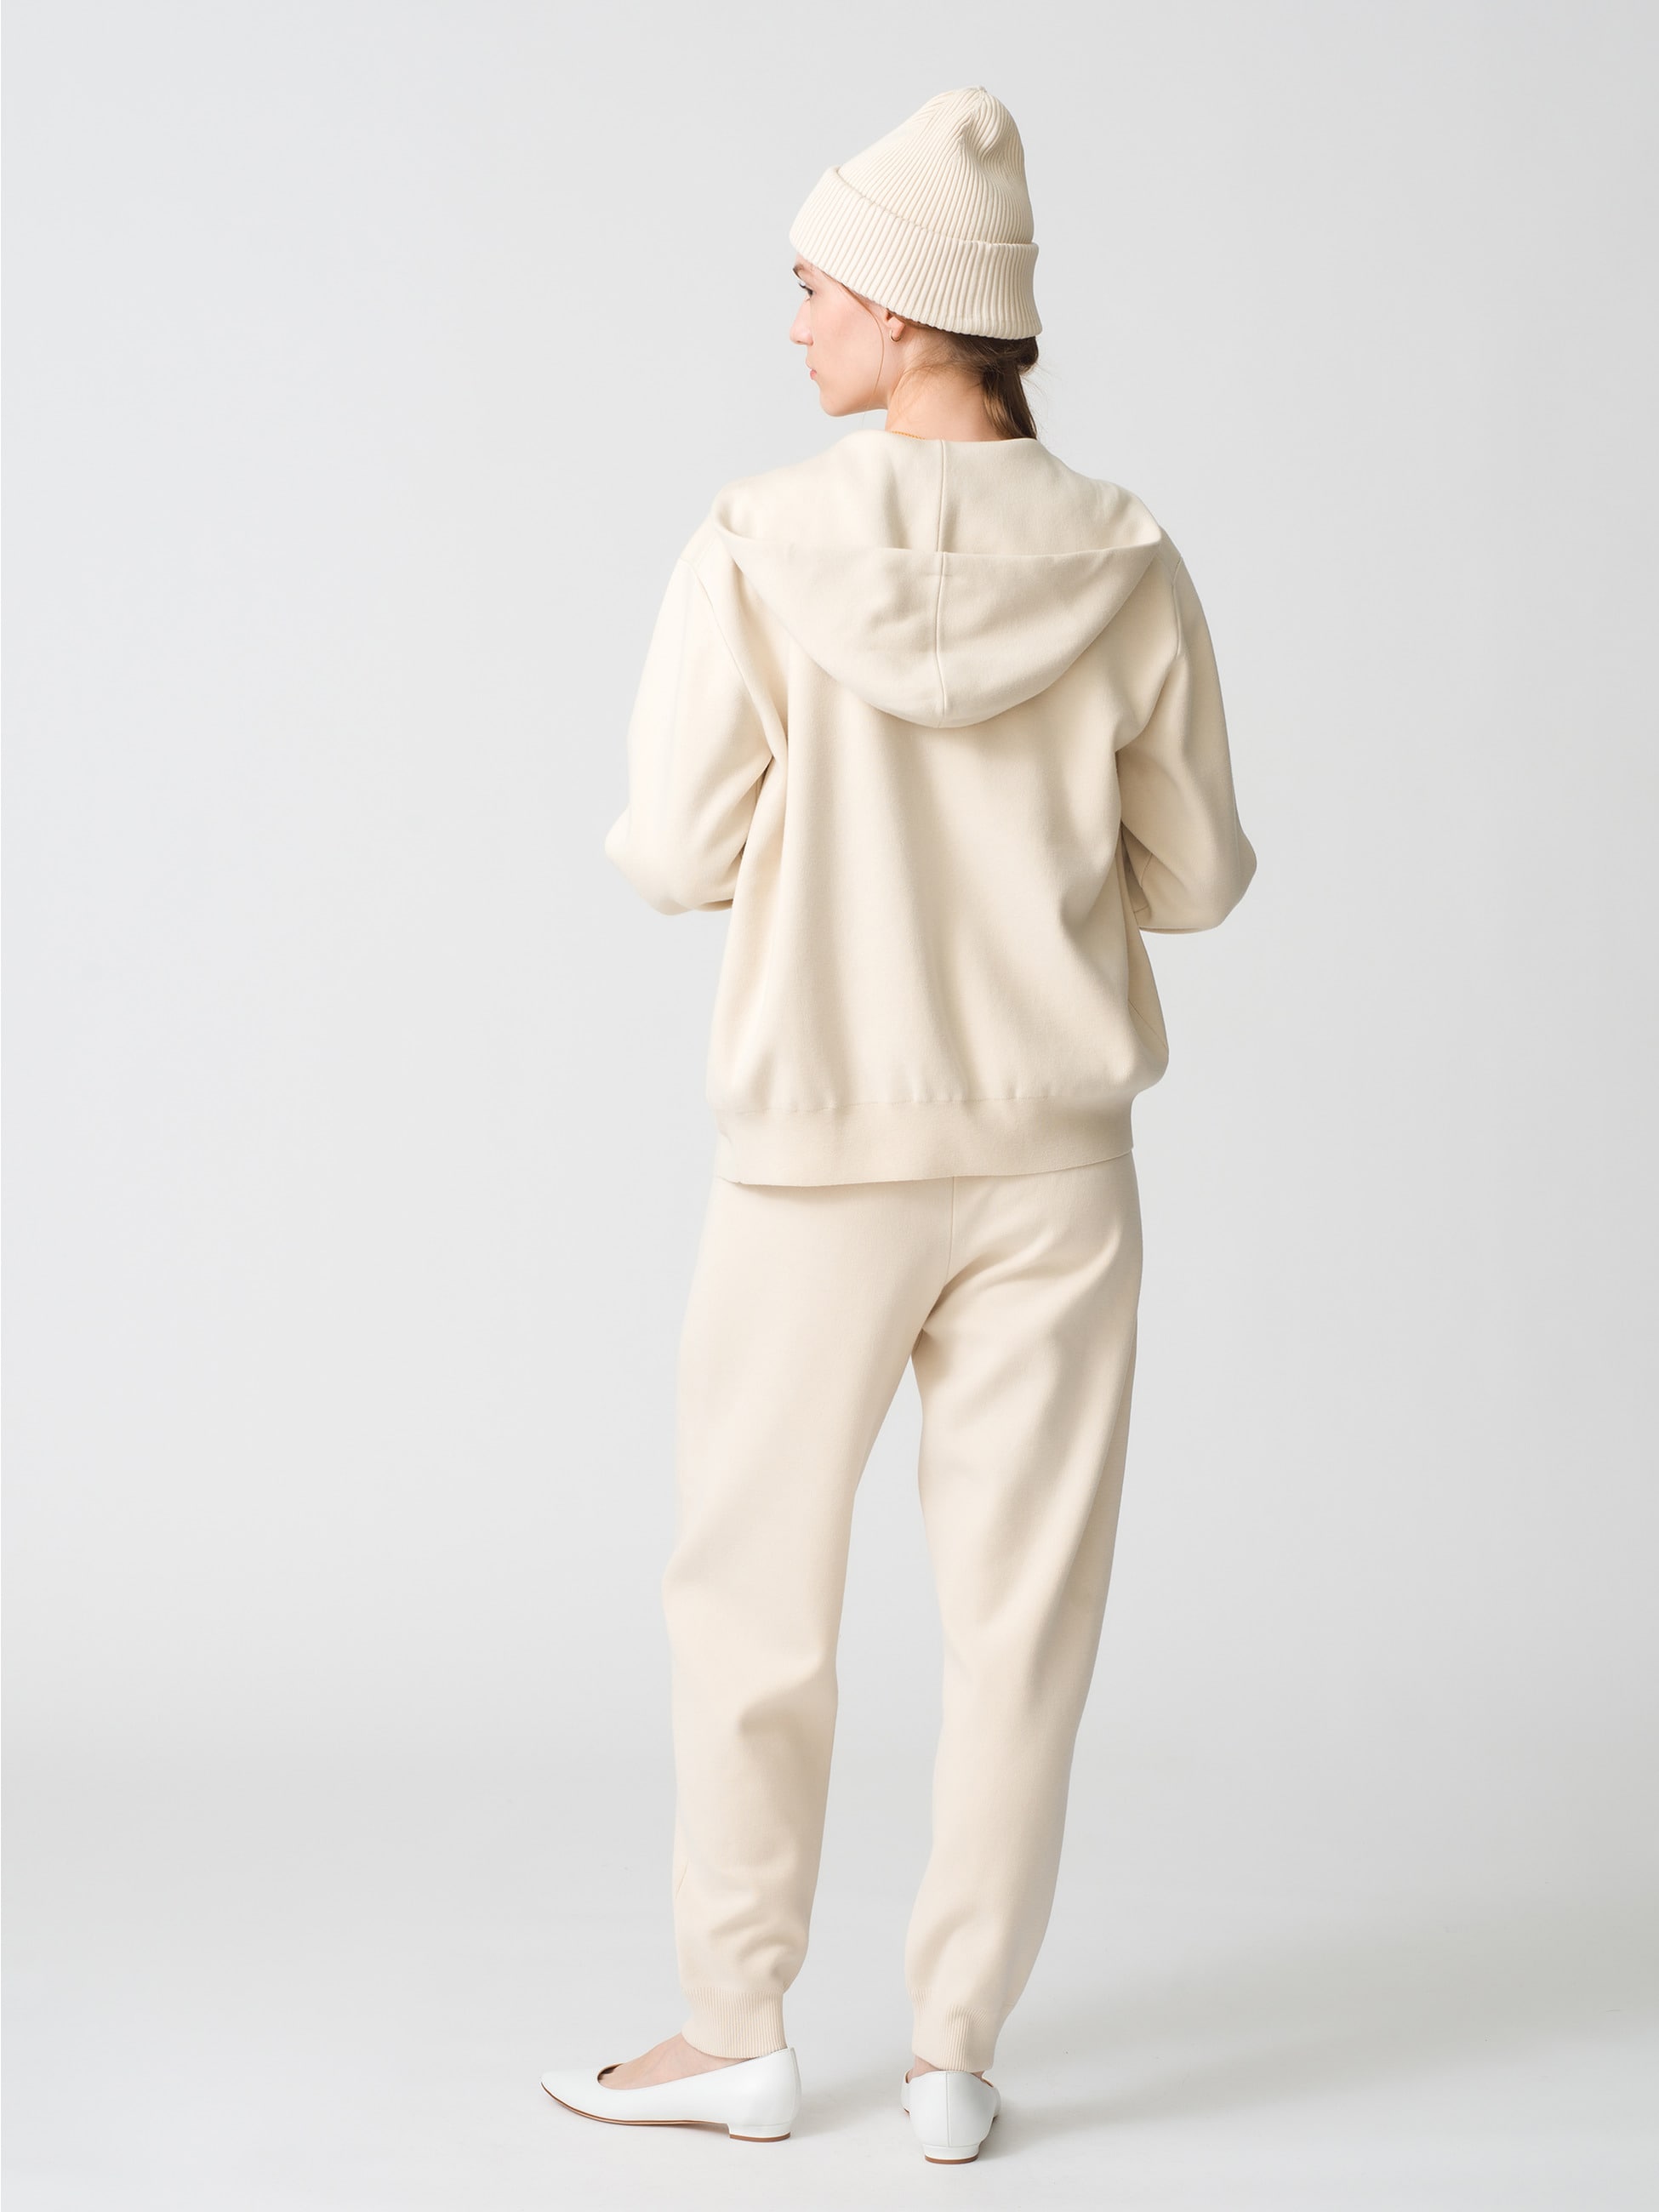 Brewed Protein Organic Cotton Knit Pants